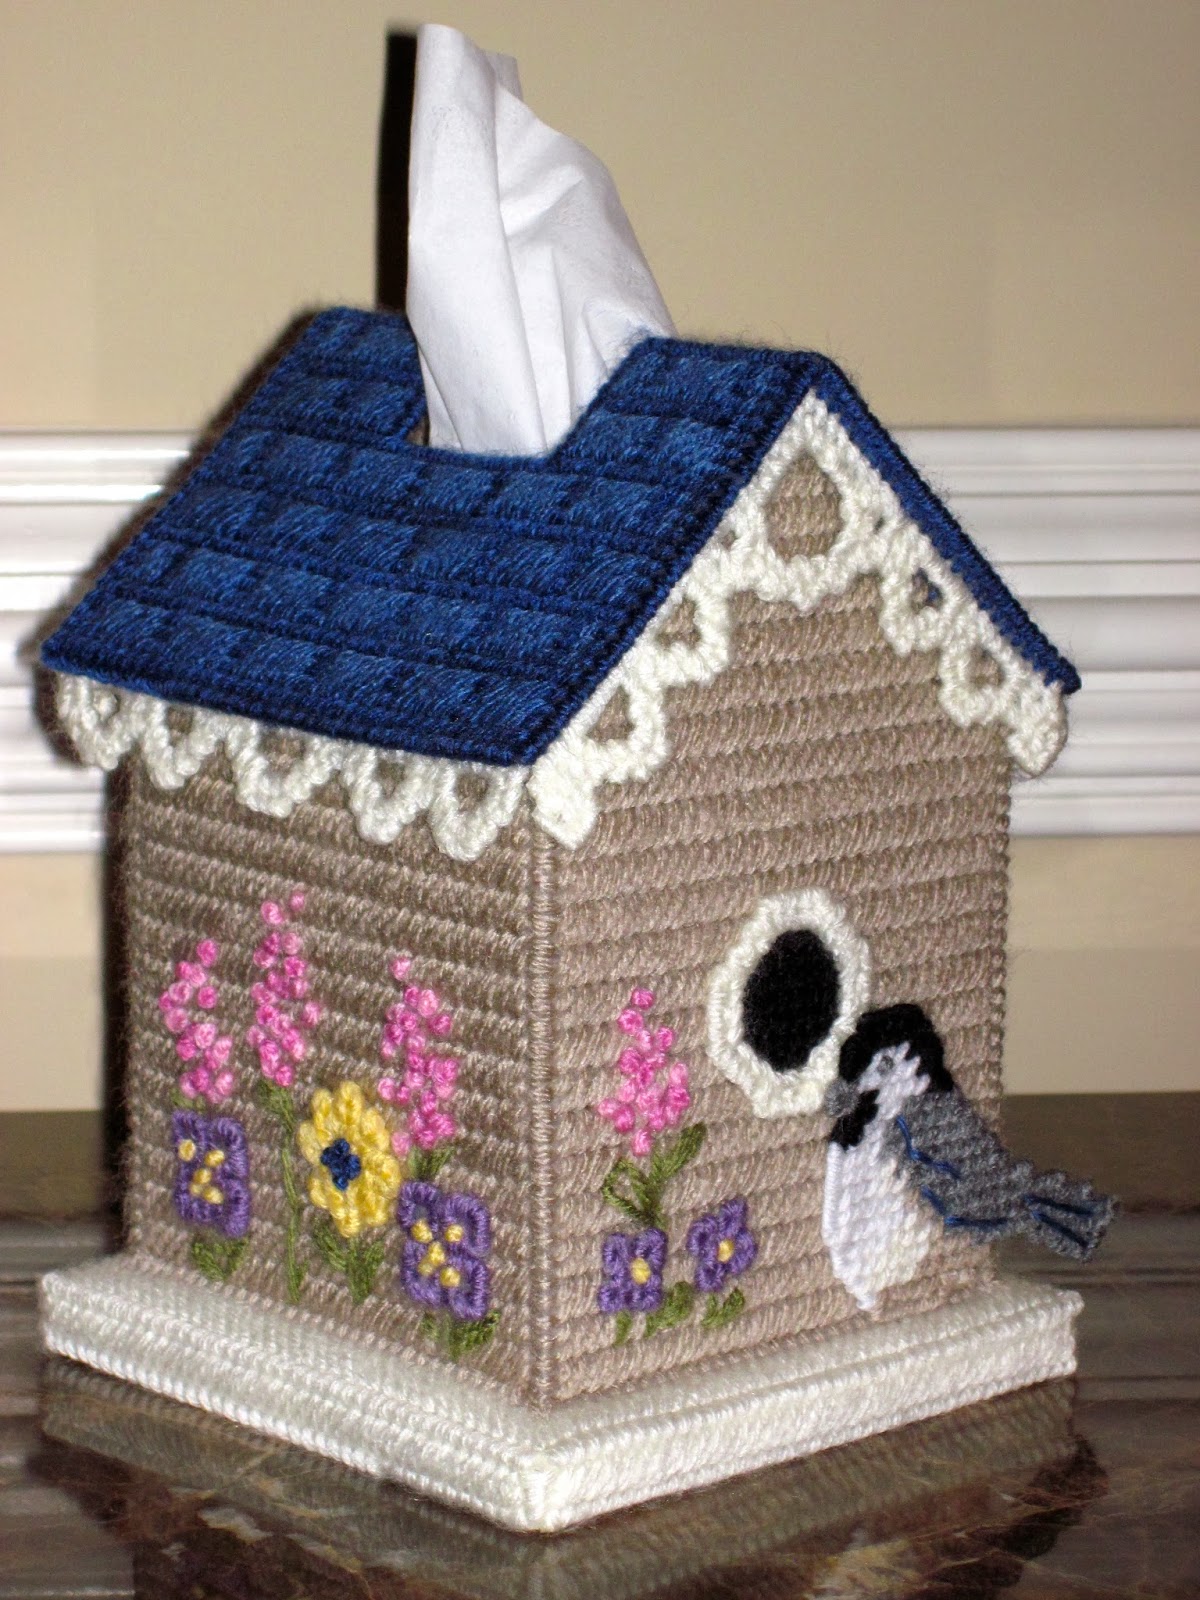 Embroidered birdhouse pillow using tissue paper + sewing machine